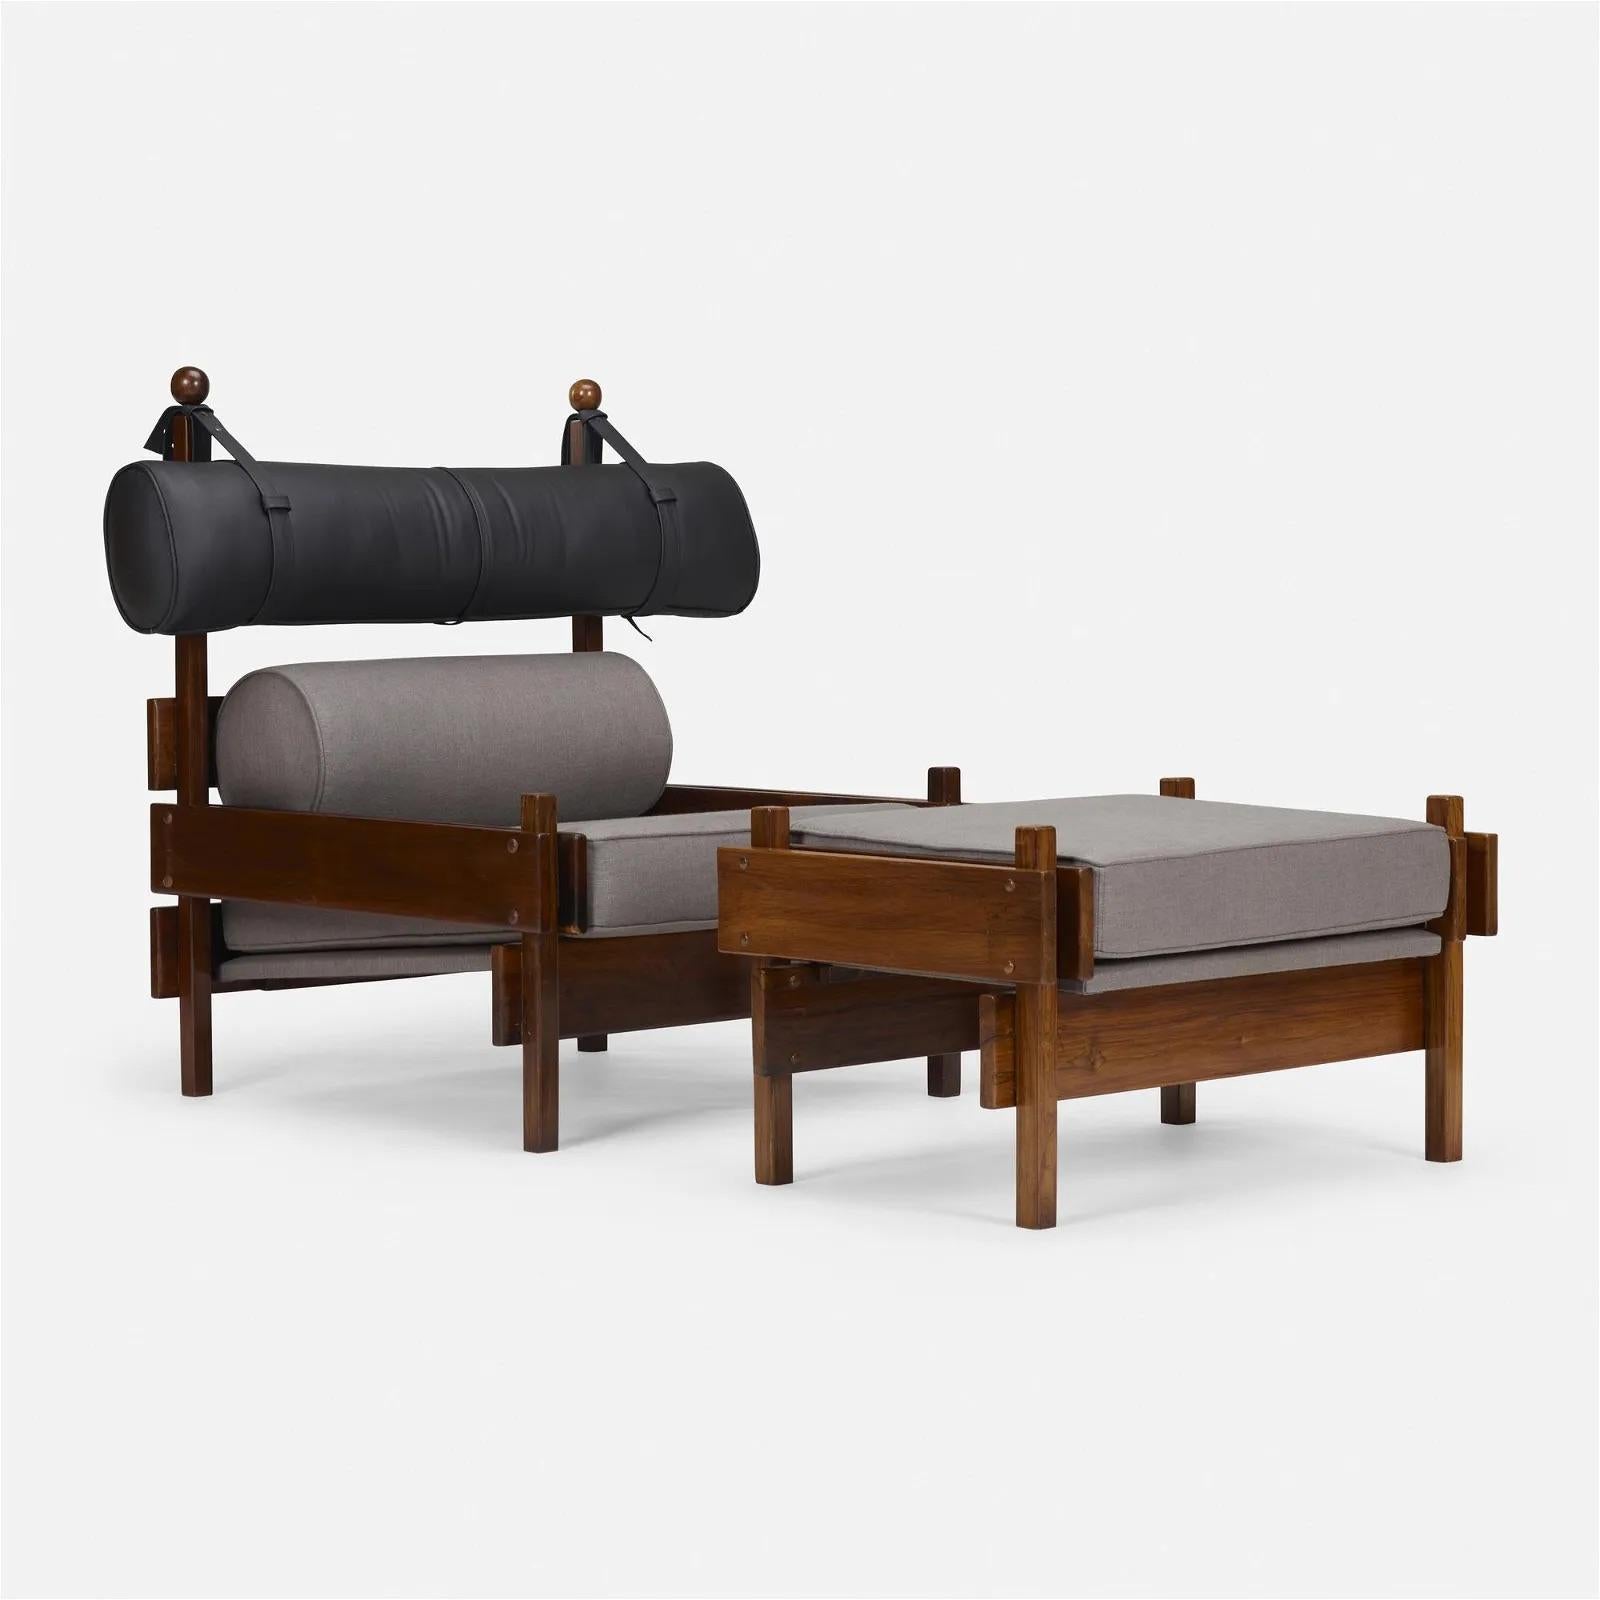 Sergio Rodrigues Tonico Lounge Chairs with Ottomans, 1960s Brazil For Sale 1